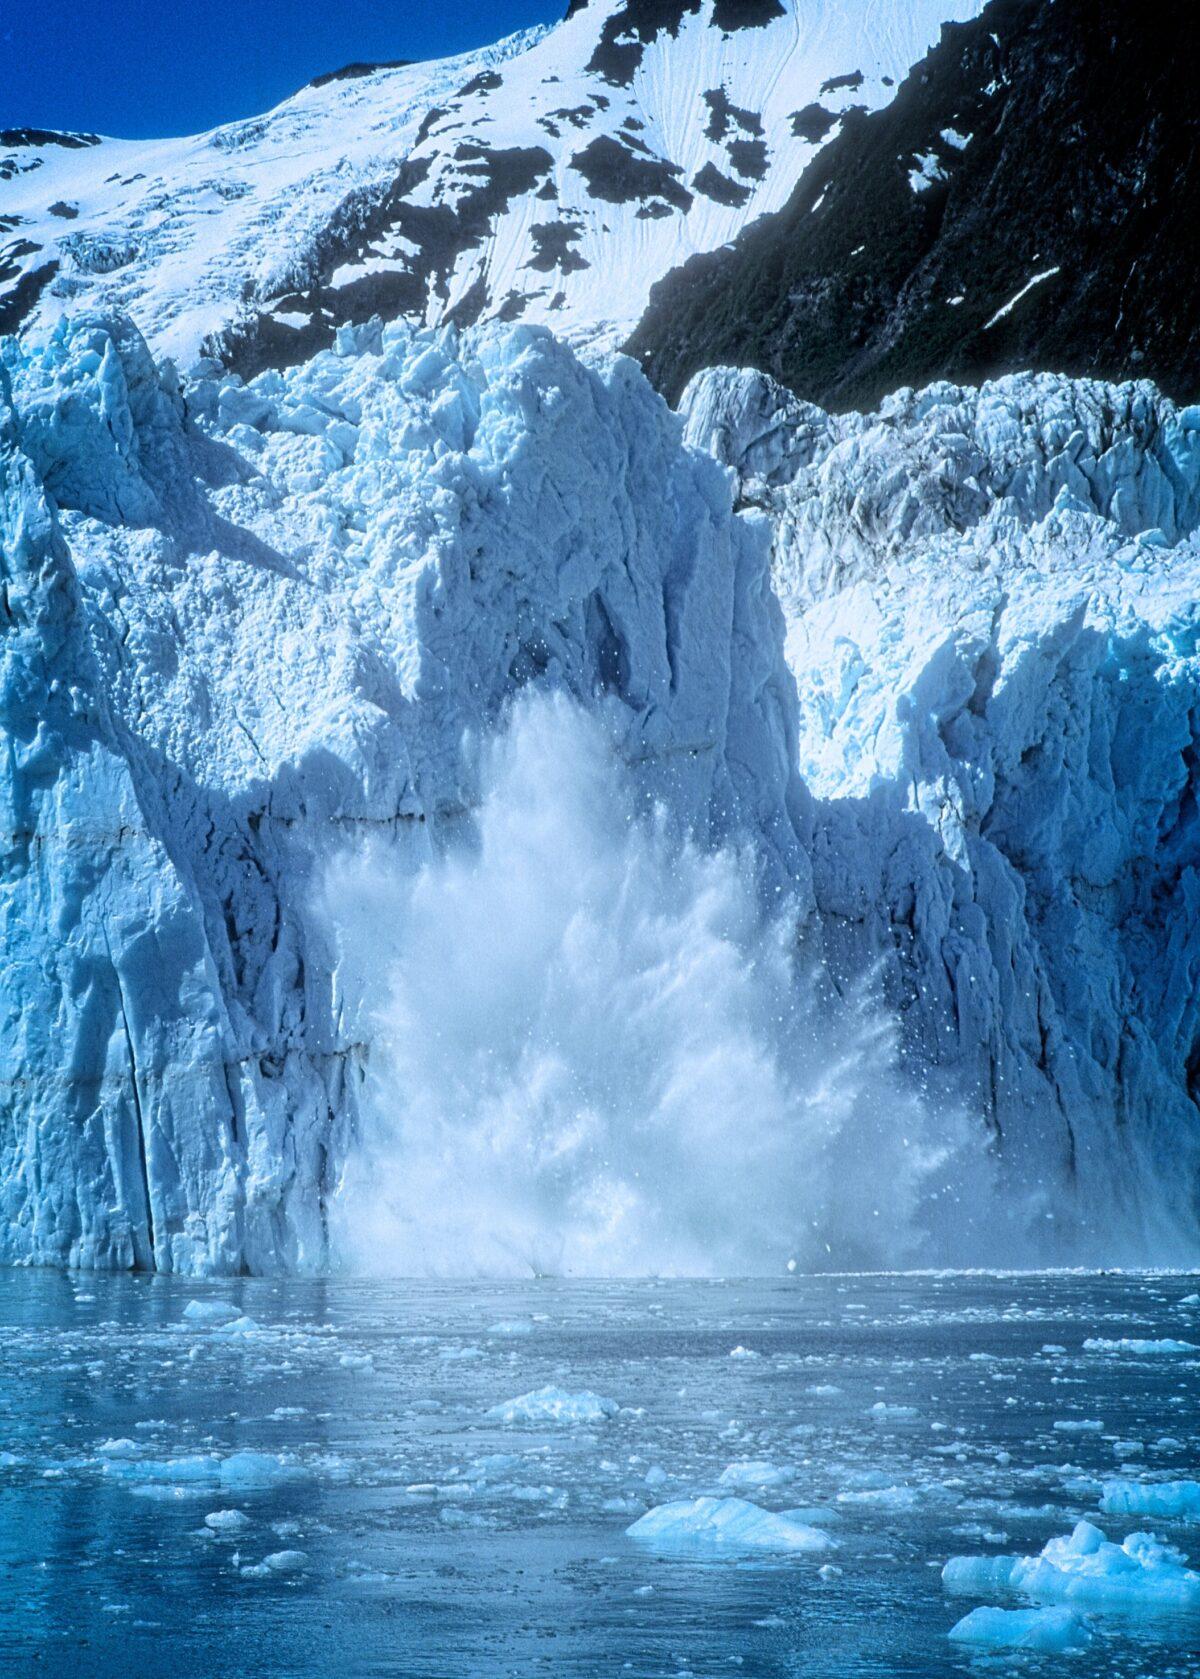  Viewing glaciers up close from a boat is a favorite excursion in Alaska. (Copyright Fred J. Eckert)